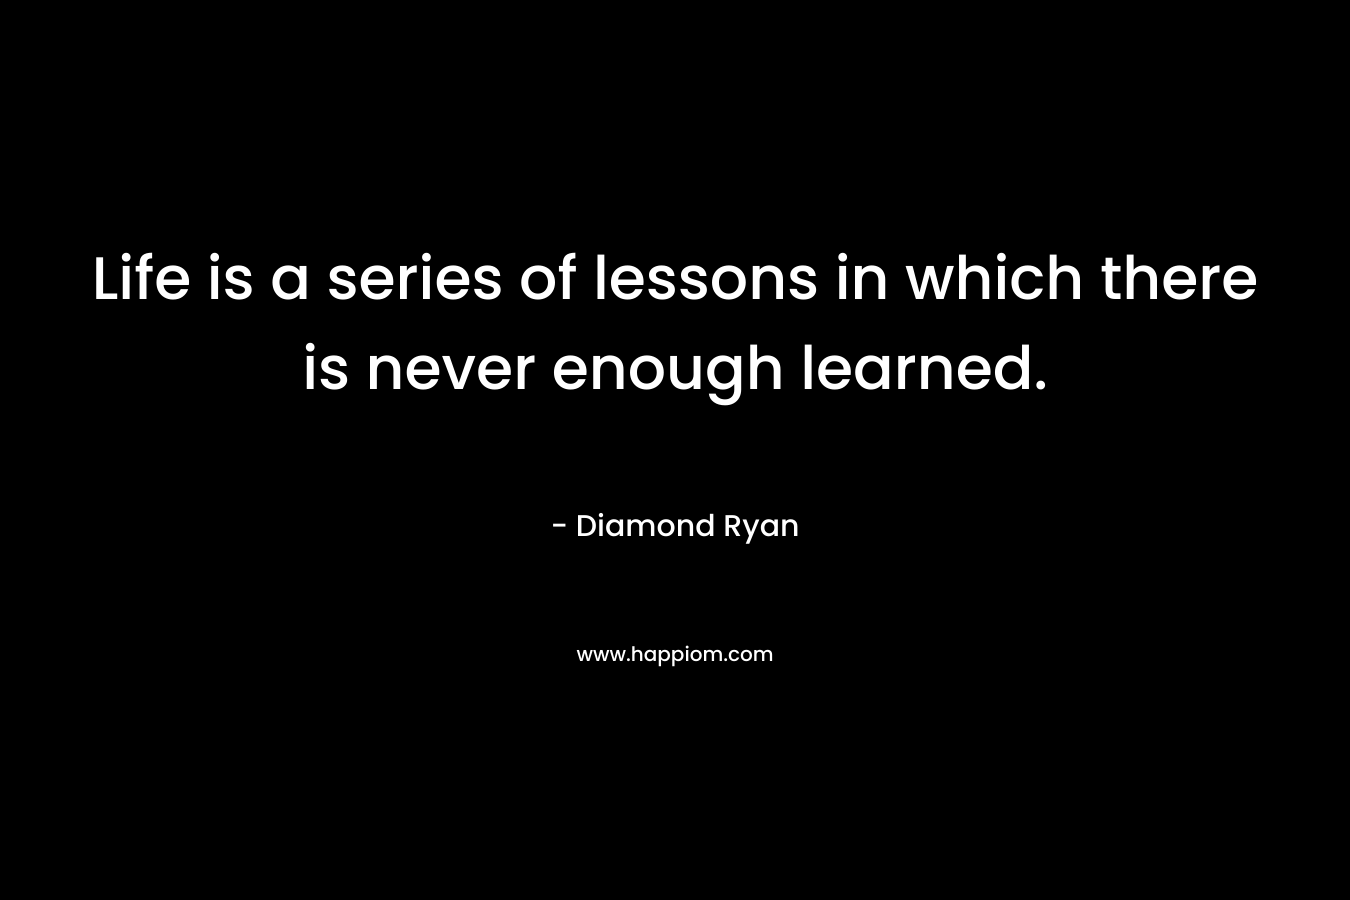 Life is a series of lessons in which there is never enough learned. – Diamond Ryan